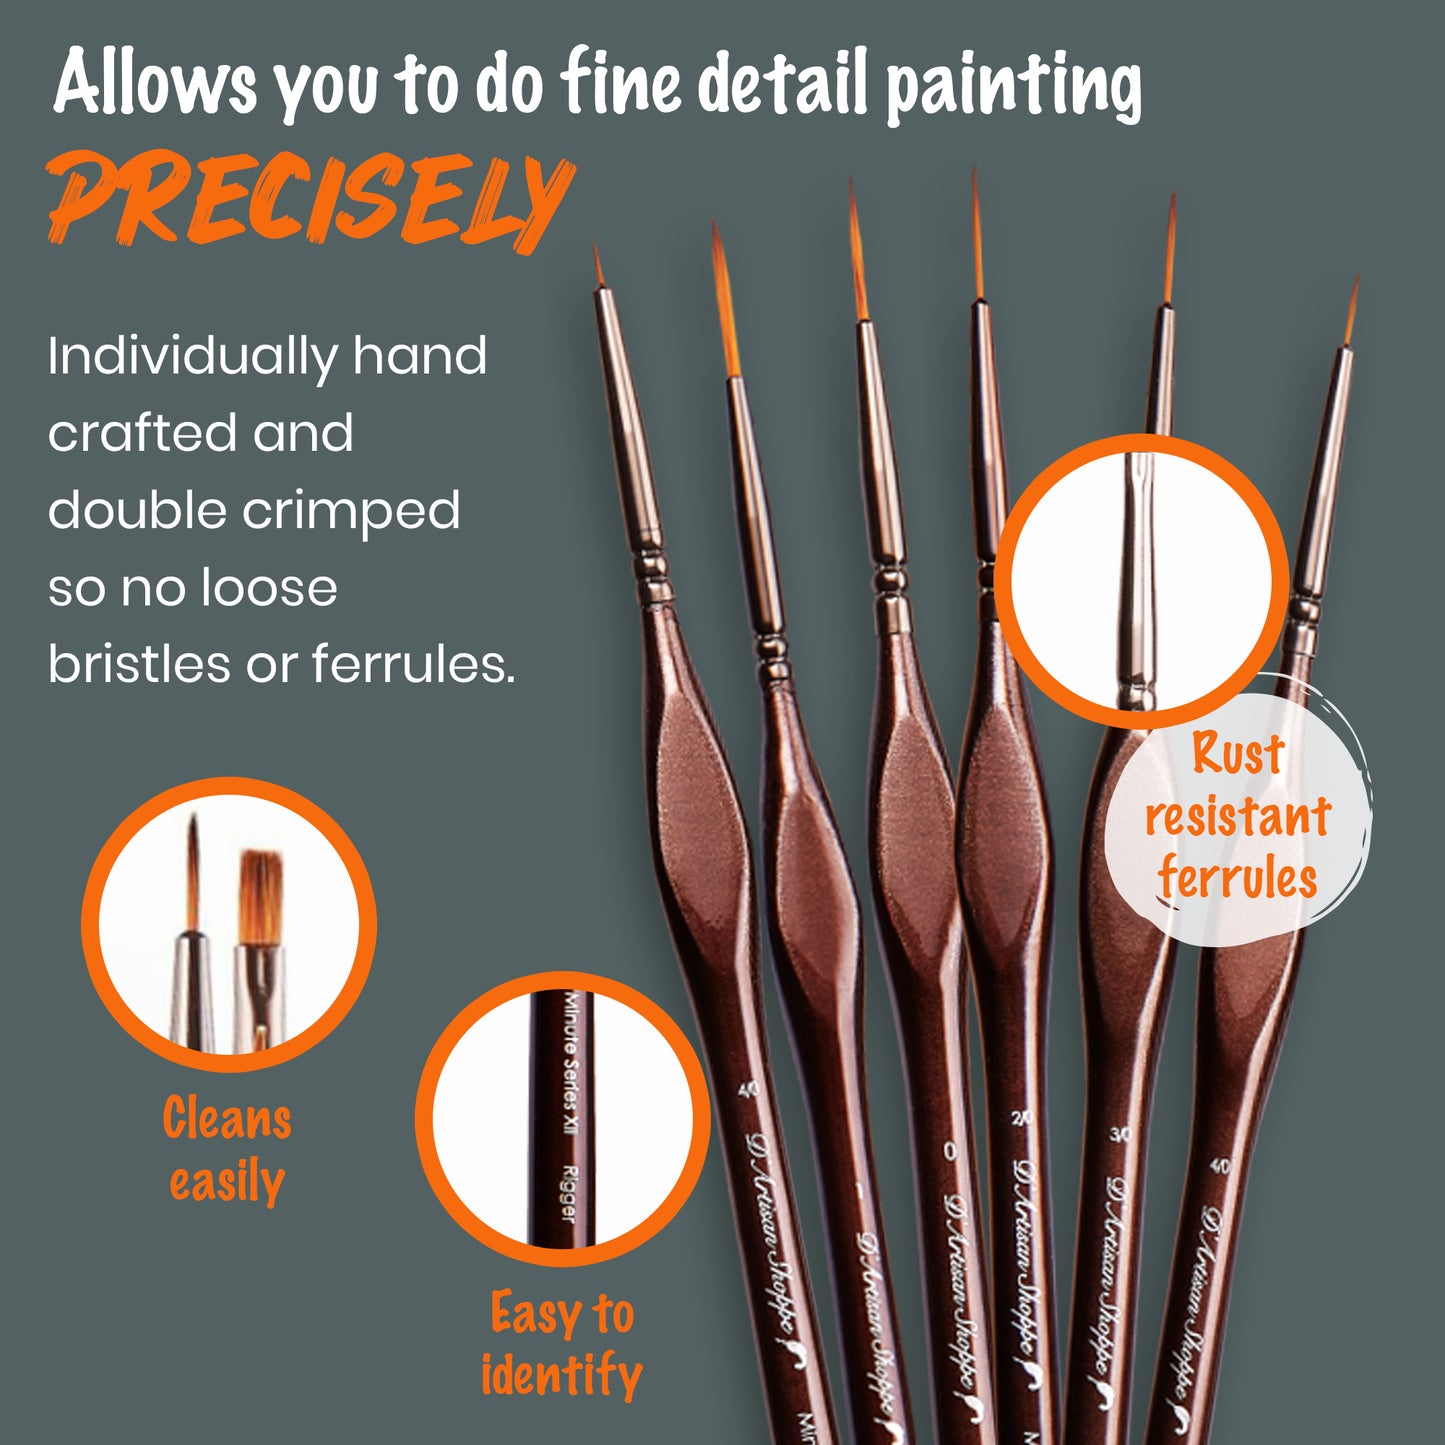 D'Artisan Shoppe Miniature Brushes: Synthetic Hobby Brush Review - Tangible  Day